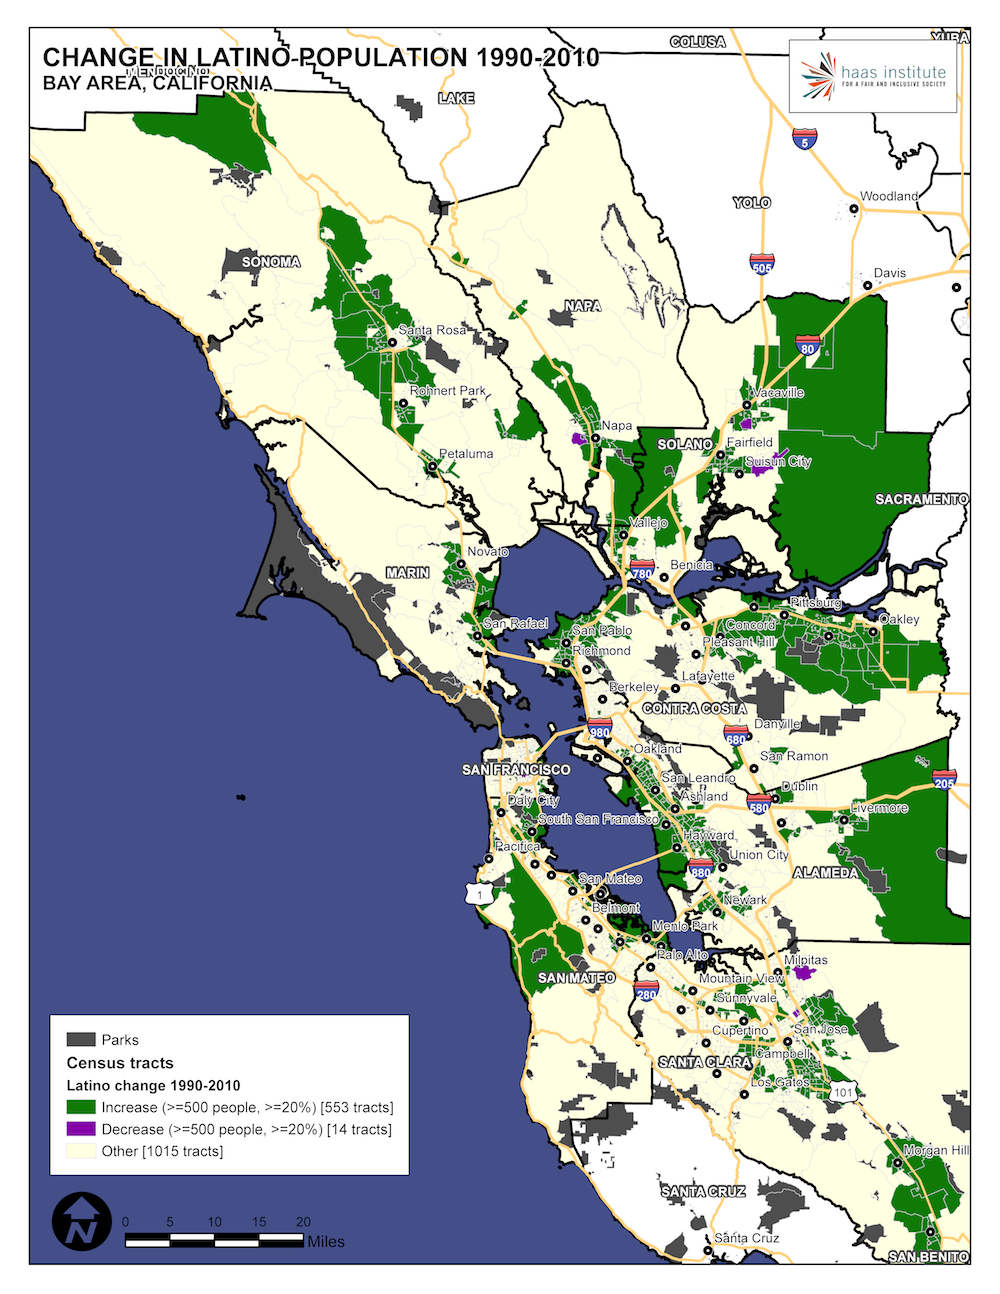 Map shows change in Bay Area Latinx population from 1990 to 2010